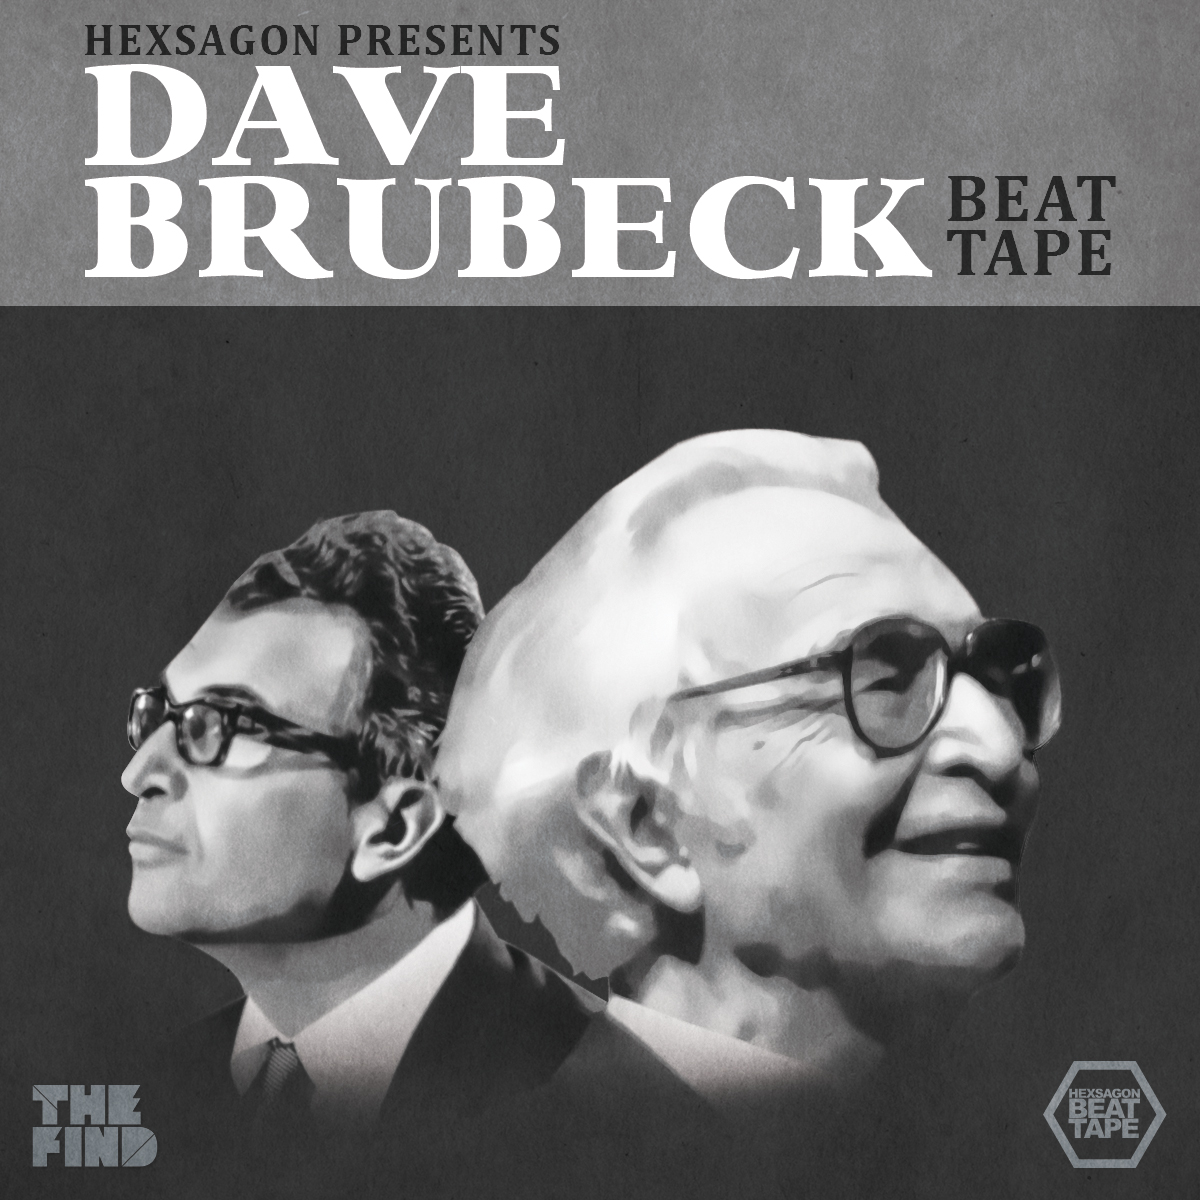 Free Download: Hexsagon & The Find Present… – Dave Brubeck Beat Tape